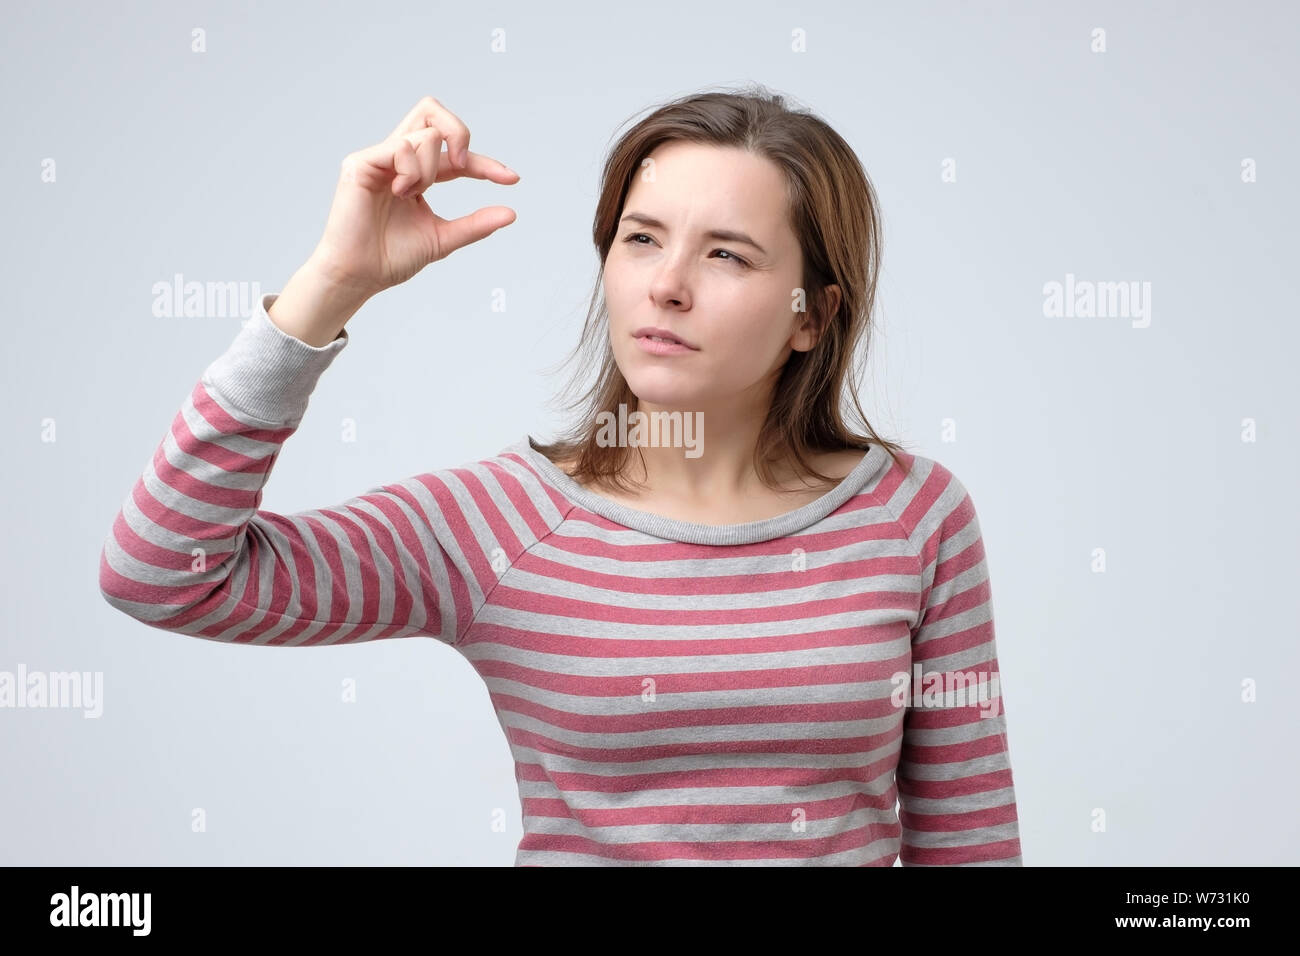 Caucasian young woman showing something small and tiny with gesture and ...